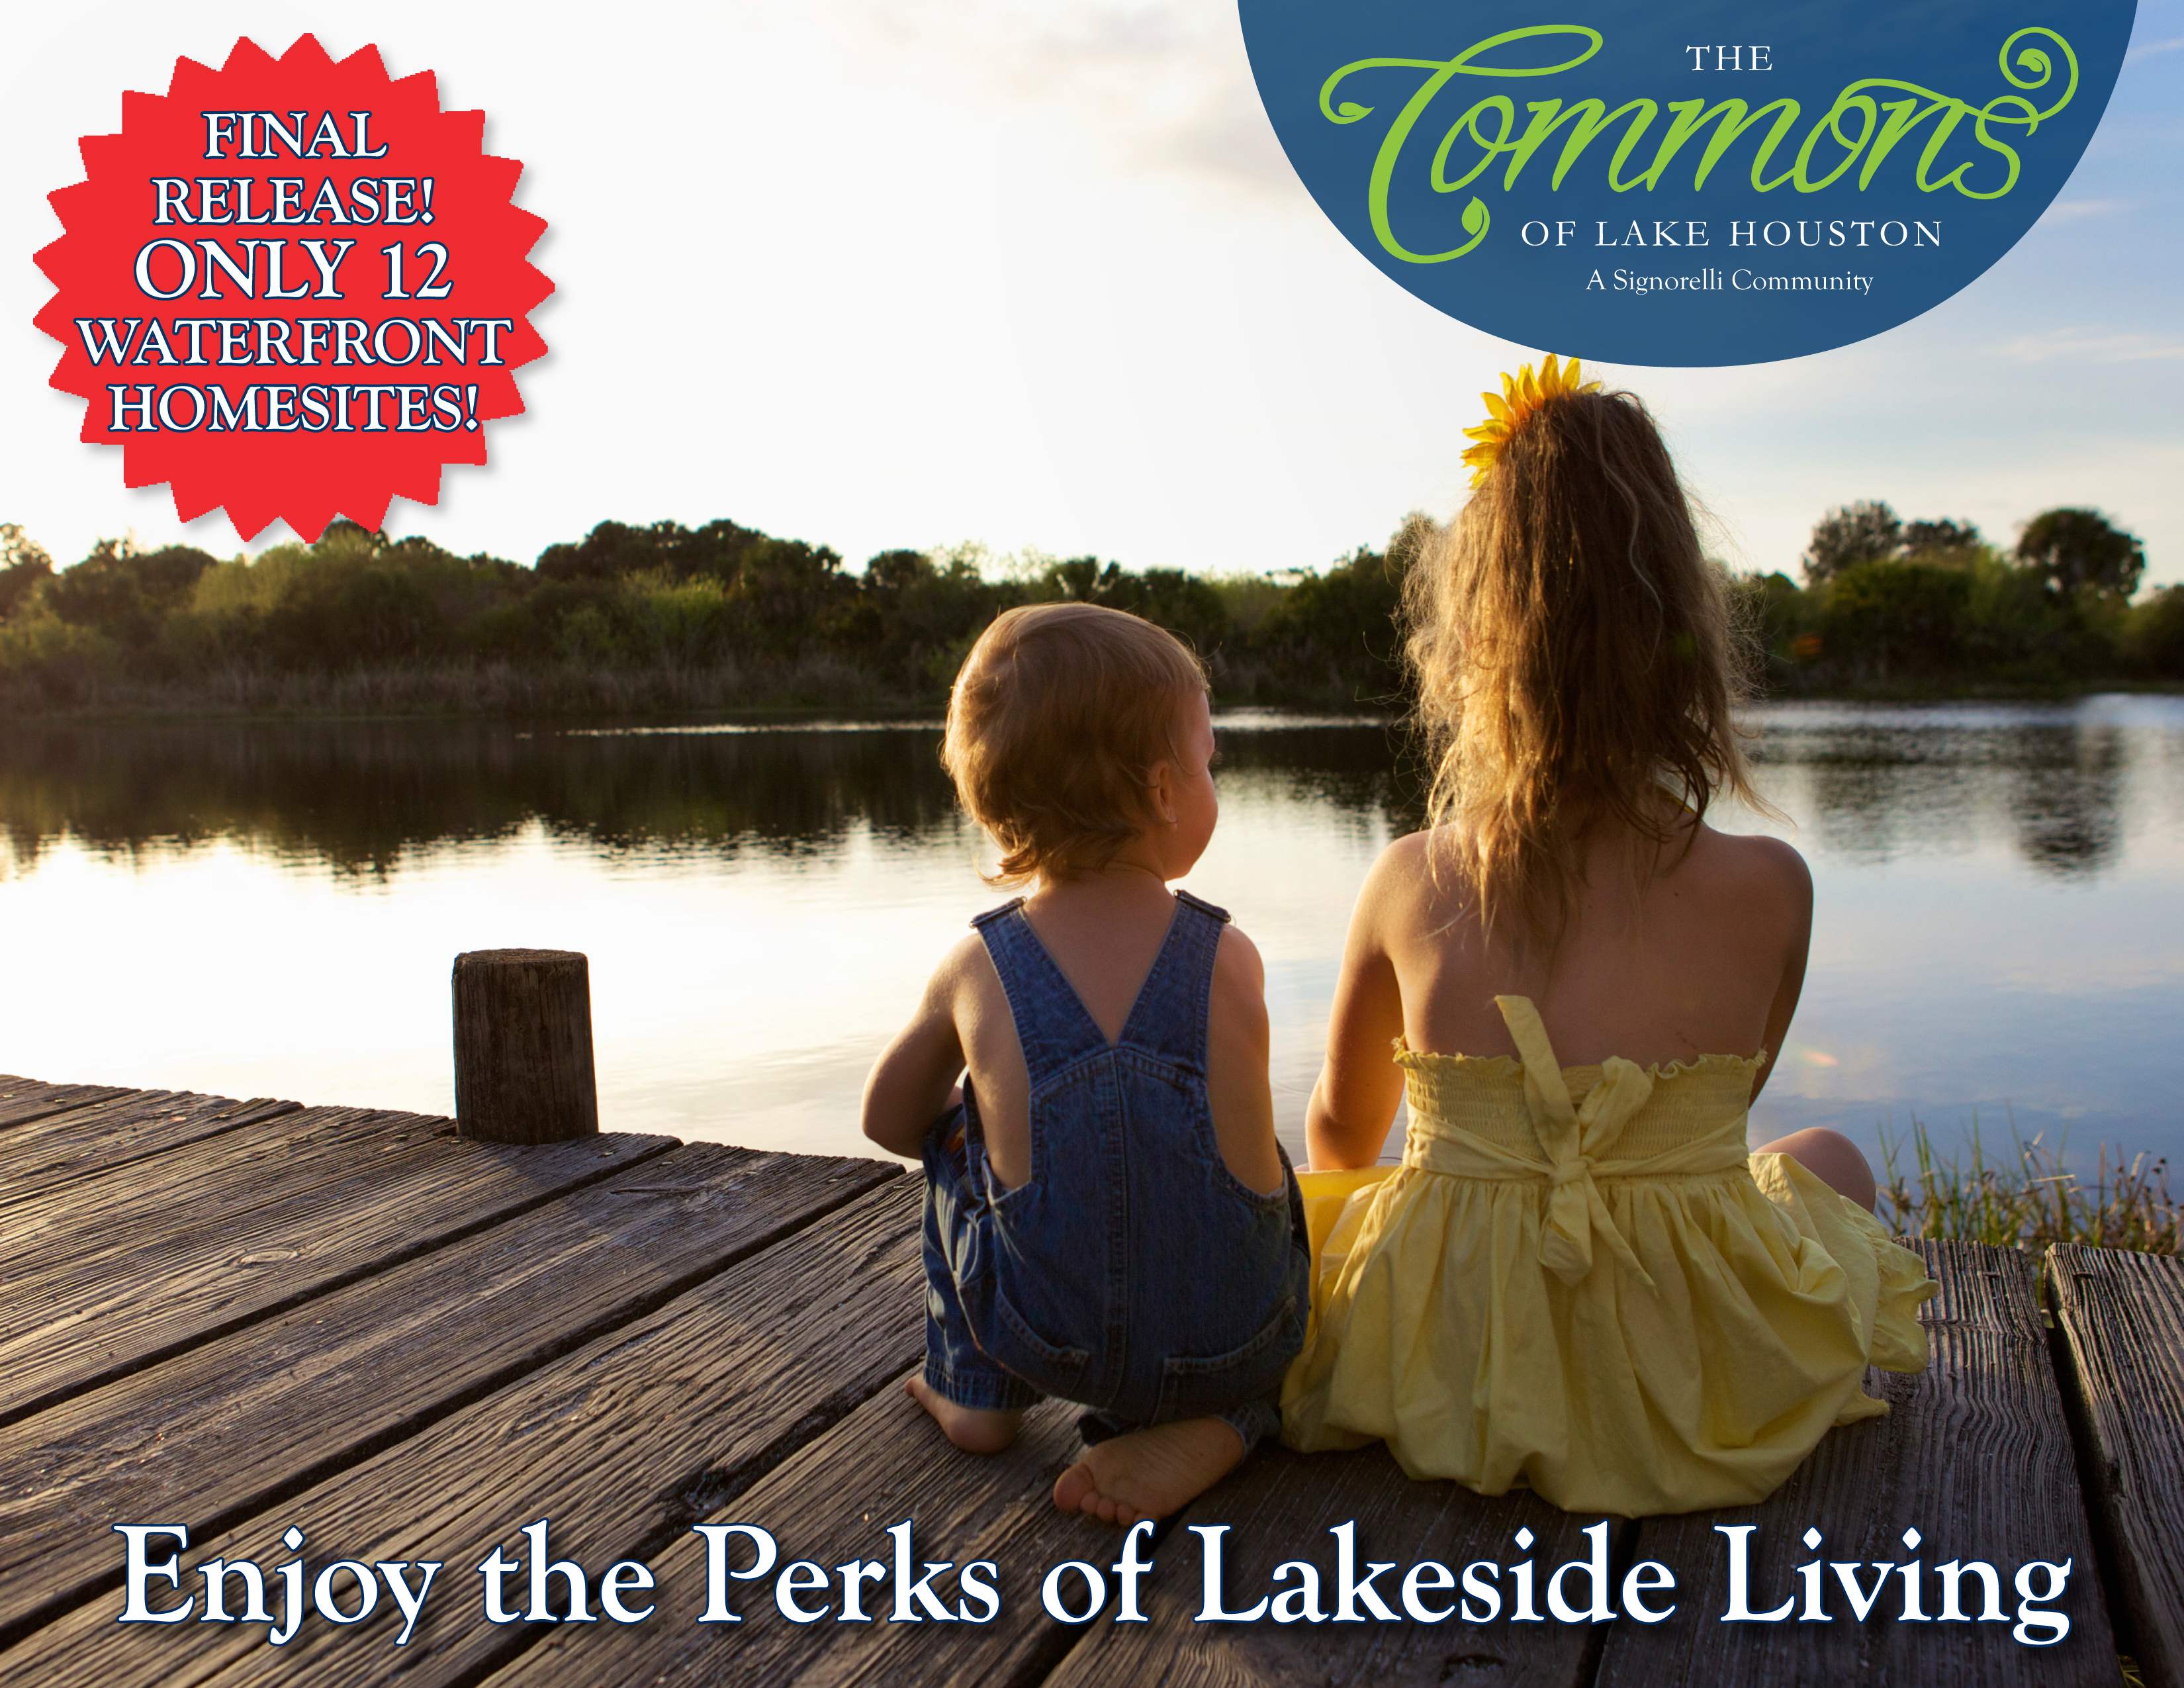 The Commons of Lake Houston Waterfront Final Release